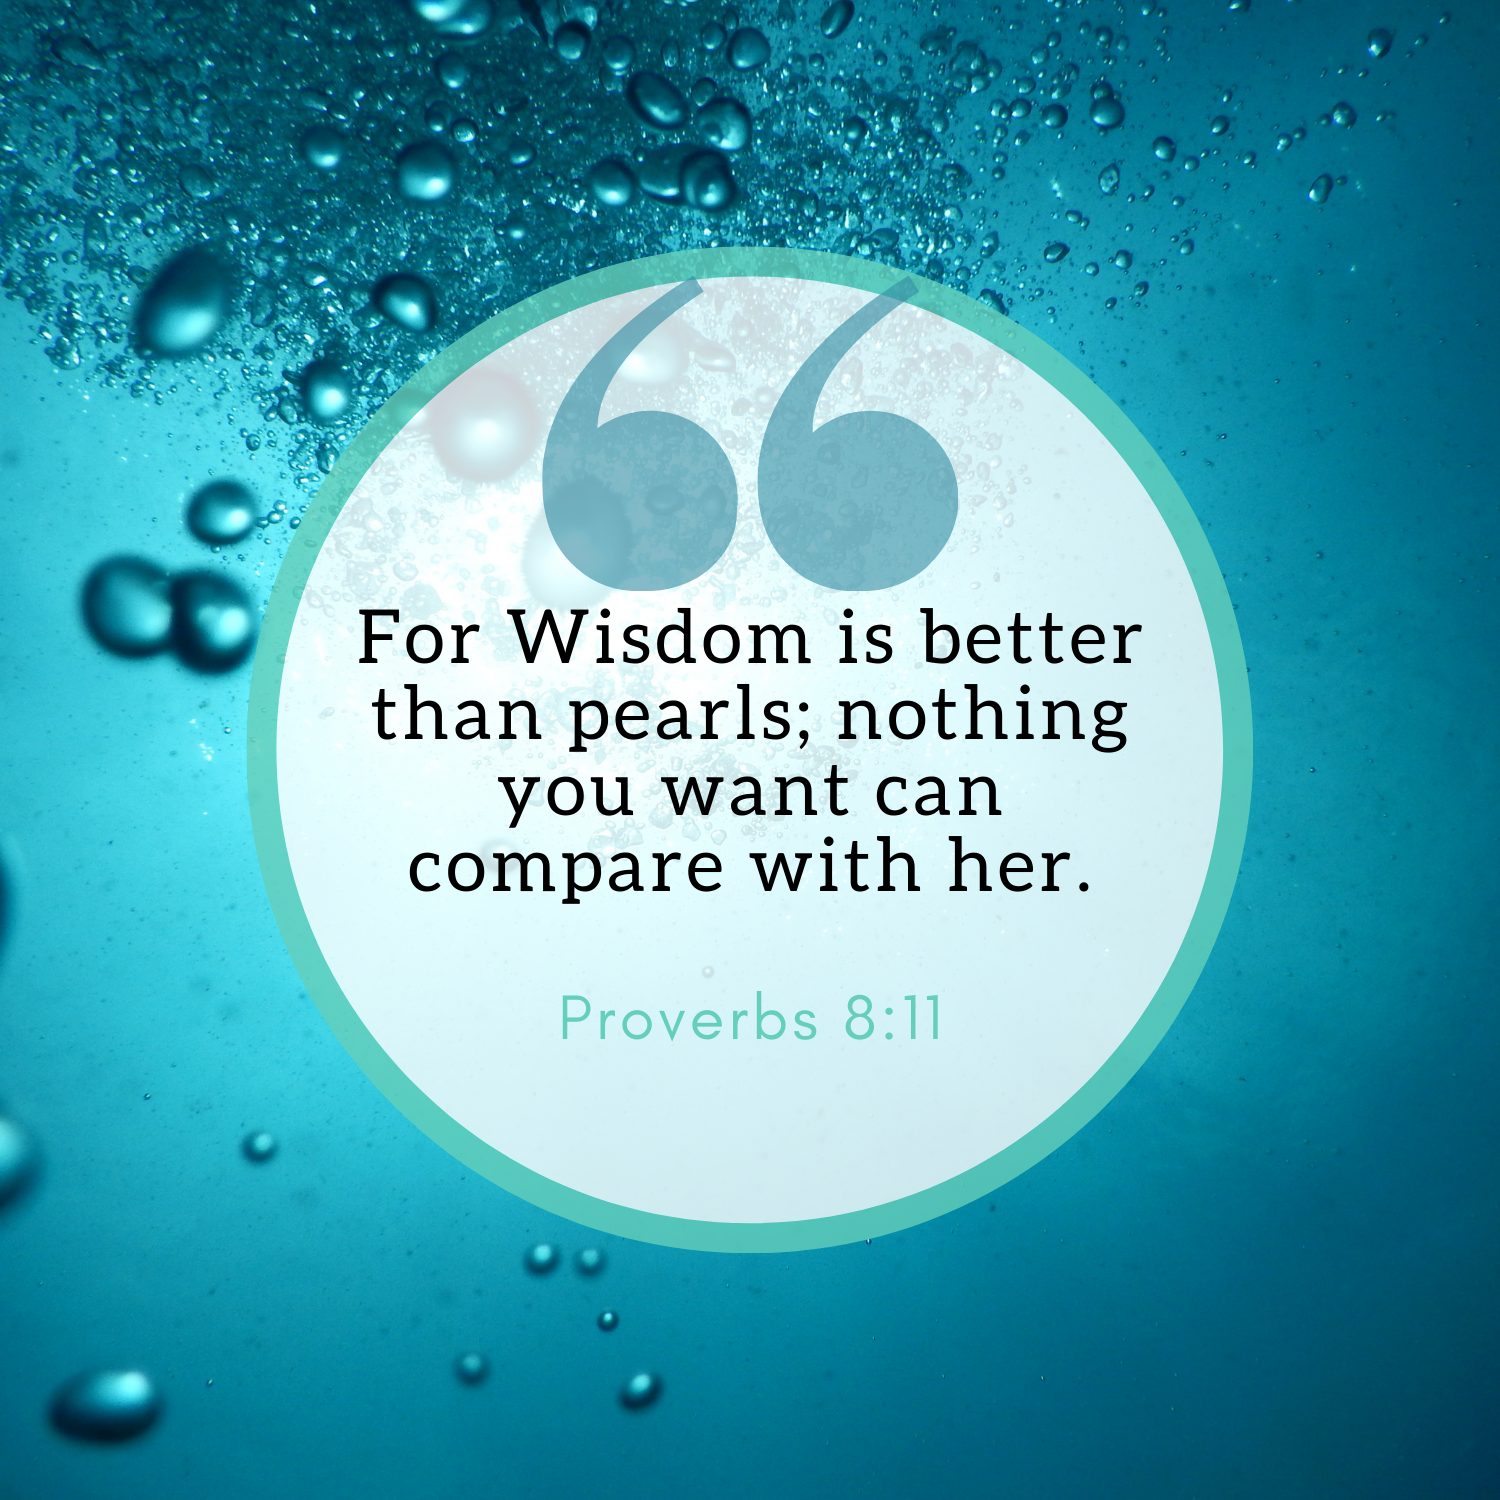 For wisdom is better than pearls; nothing you want can compare with her. Proverbs 8:11